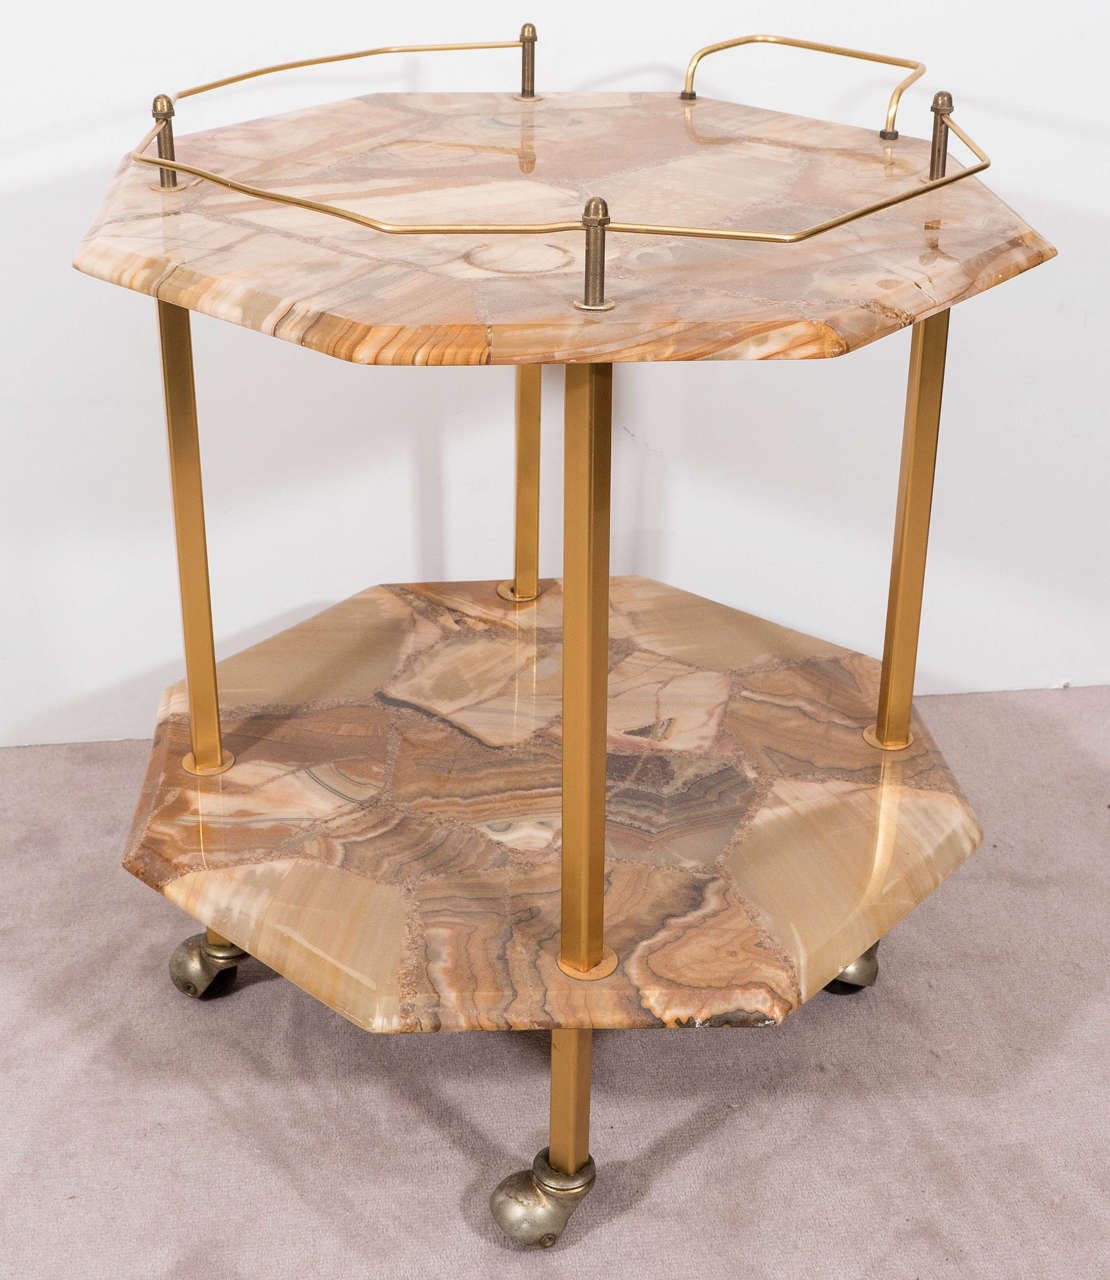 A vintage cocktail cart, produced, circa 1960s, with two octagonal shaped tiers in polished agate, with a handle, gallery and four legs in gilded brass, on casters. Good vintage condition with minor age appropriate wear and faint patina to the brass.